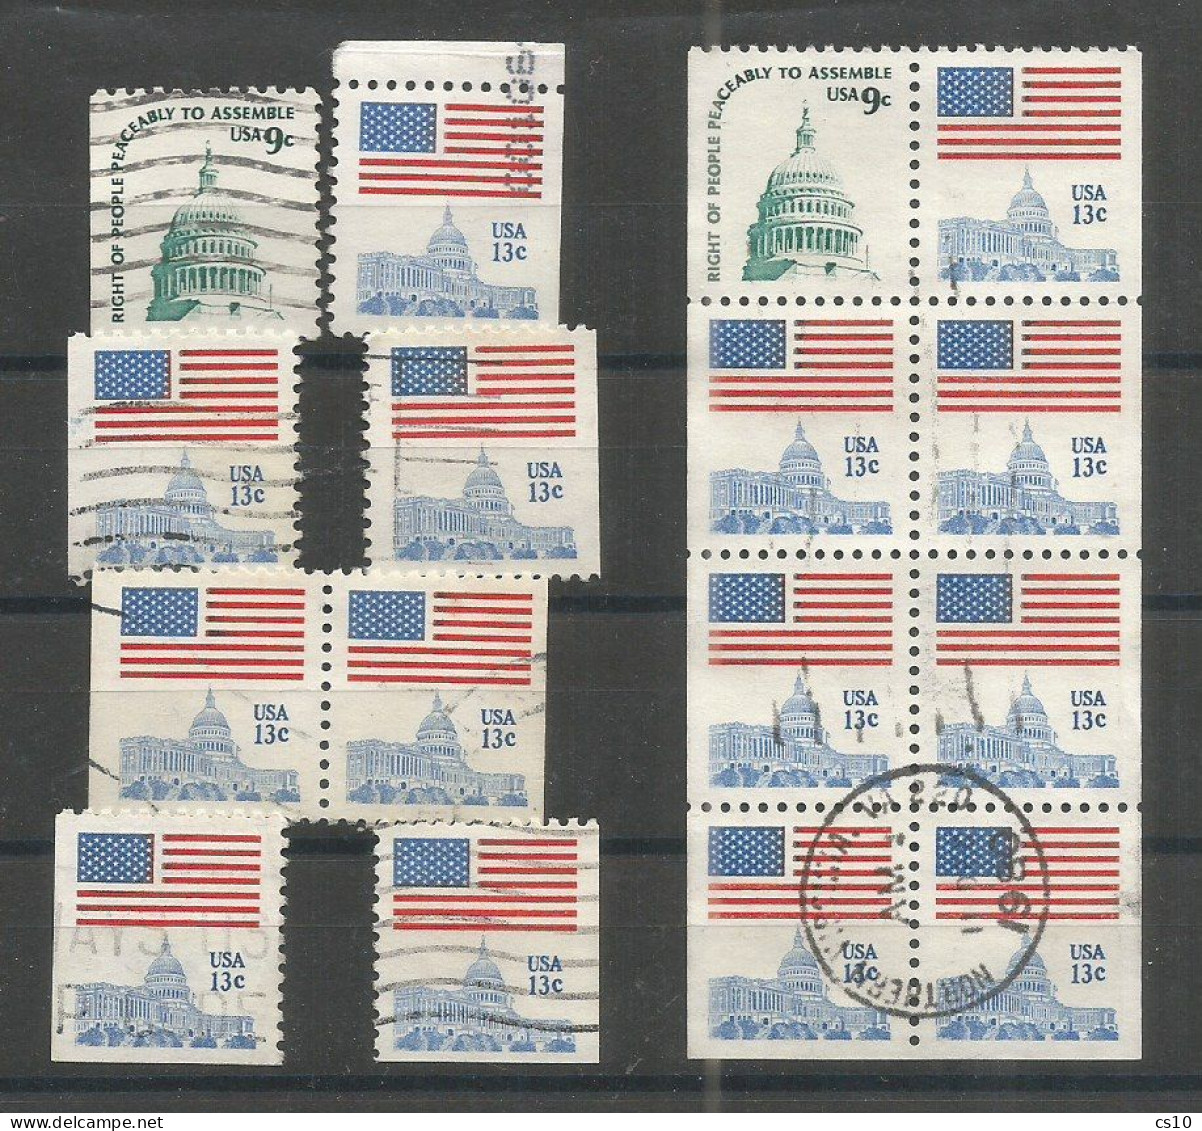 USA 1975 Americana C.9+c.13 Perf.11 Cpl Booklet Issue . Booklet Pane Used 1980 + Pair + L/R On 2/3 Sides Incl. Upper Pcs - Errors, Freaks & Oddities (EFOs)